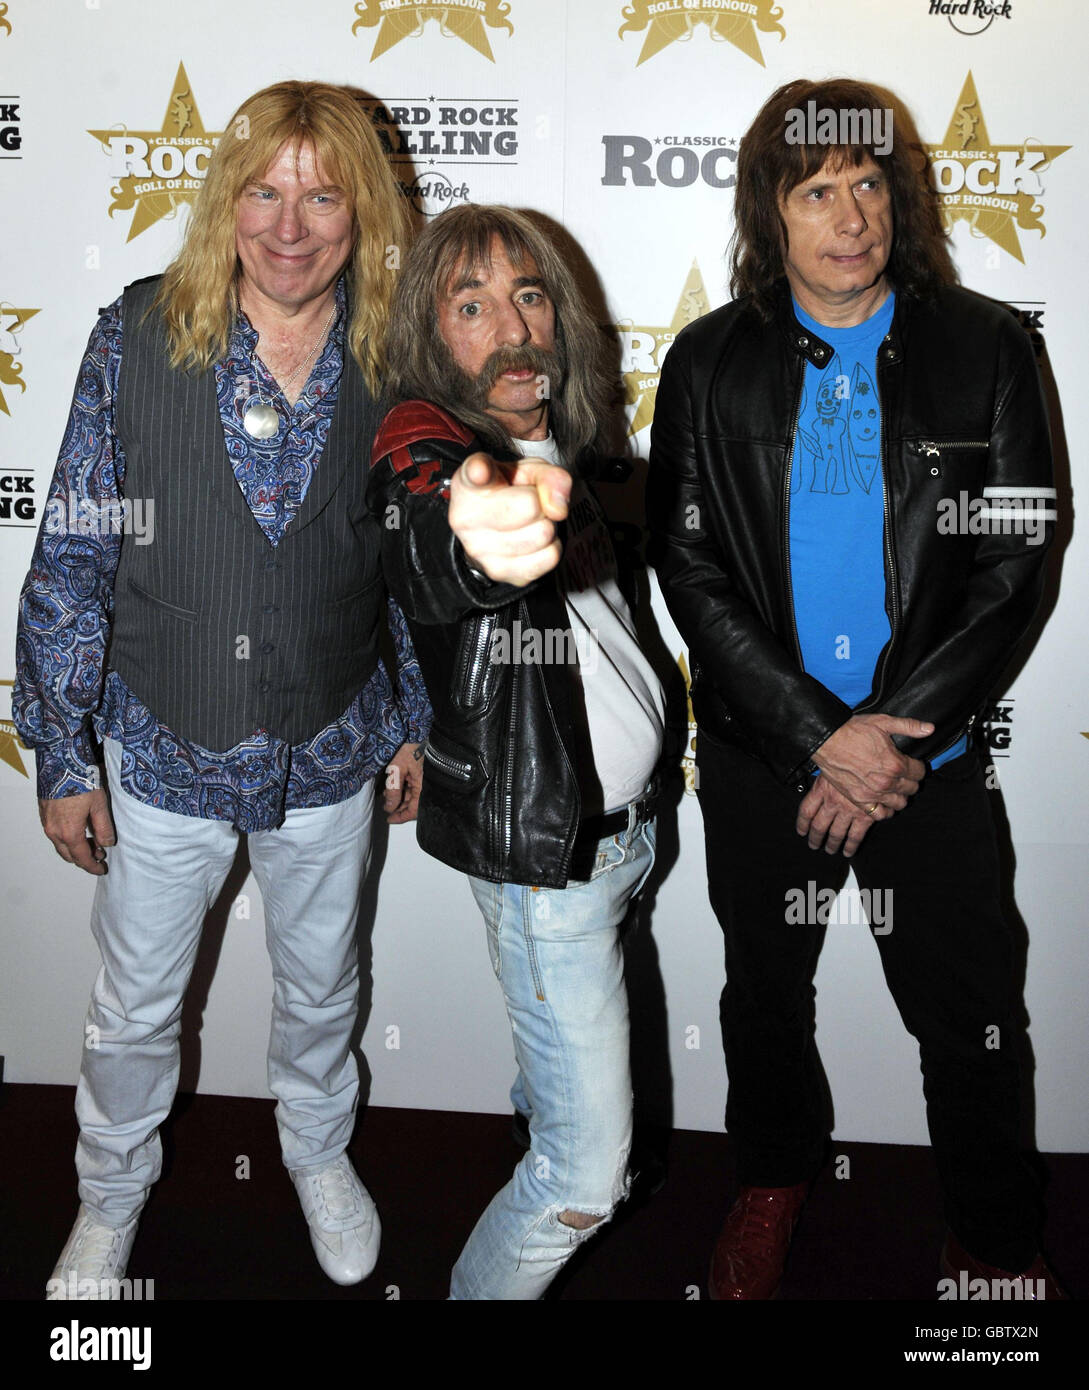 Spoof rock band Spinal tap, featuring, from left, David St. Hubbins (Michael McKean), Derek Smalls (Harry Shearer) and Nigel Tufnel (Christopher Guest) pose for pictures for the Classic Rock Roll of Honour Nominations launch. Stock Photo